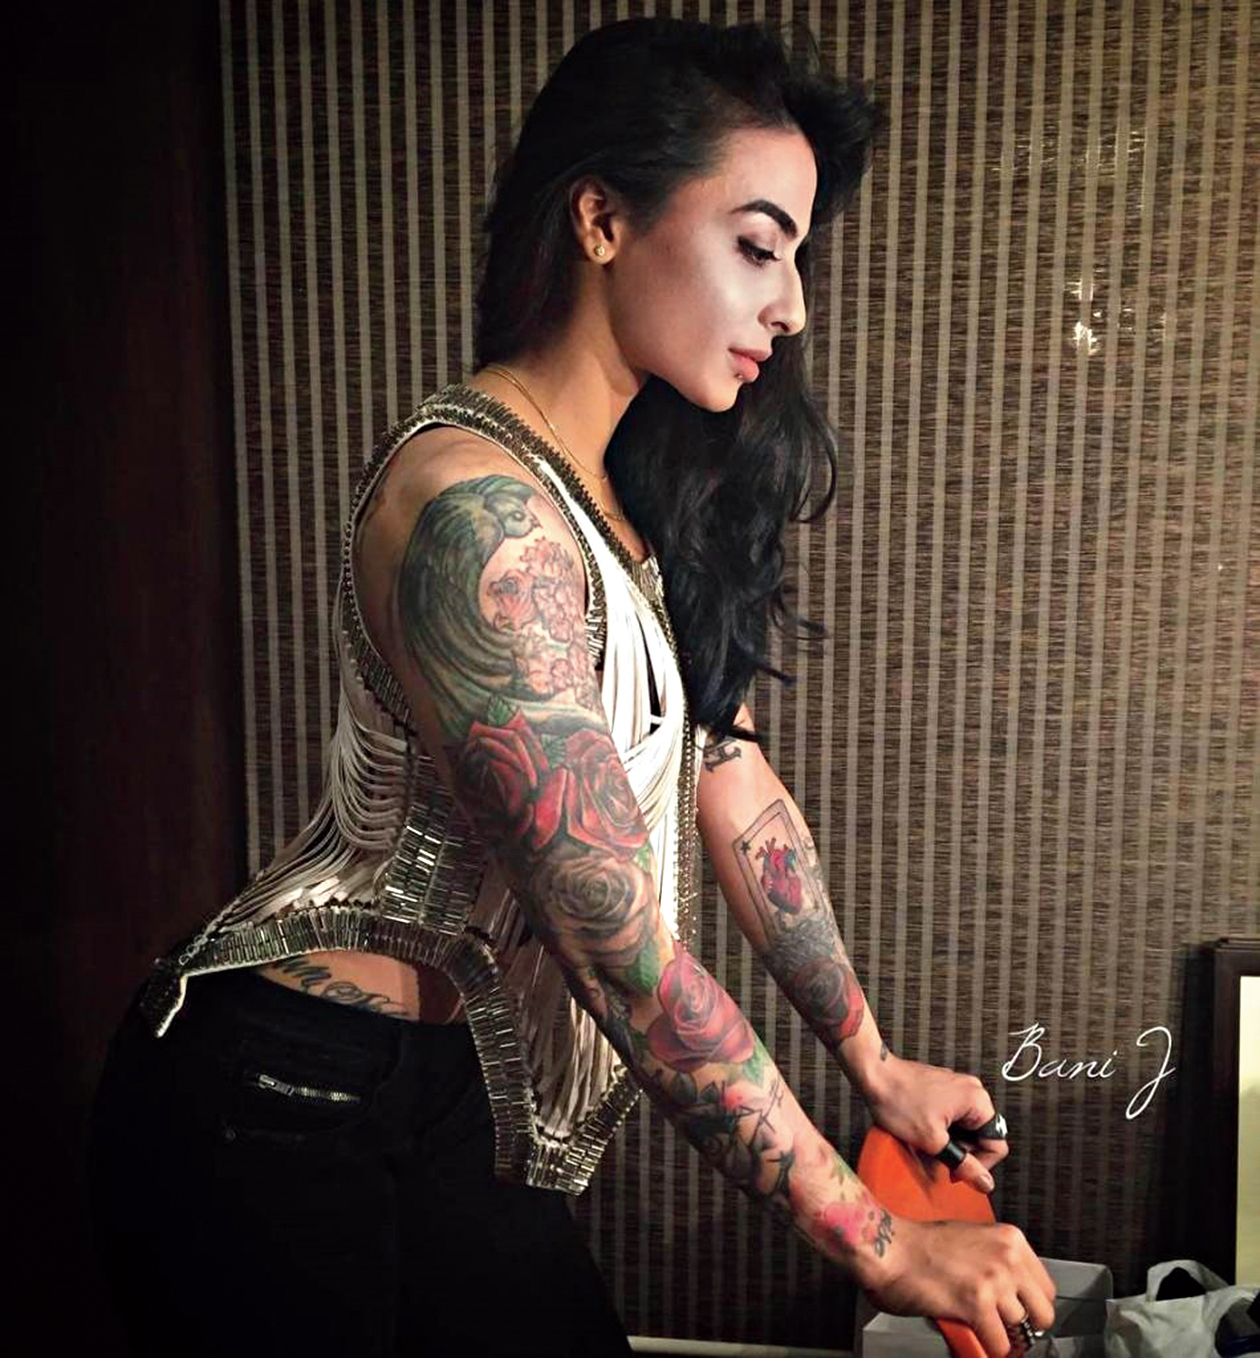 Bani J just posted a topless photo on Instagram and it draws attention to  her stunning tattoos